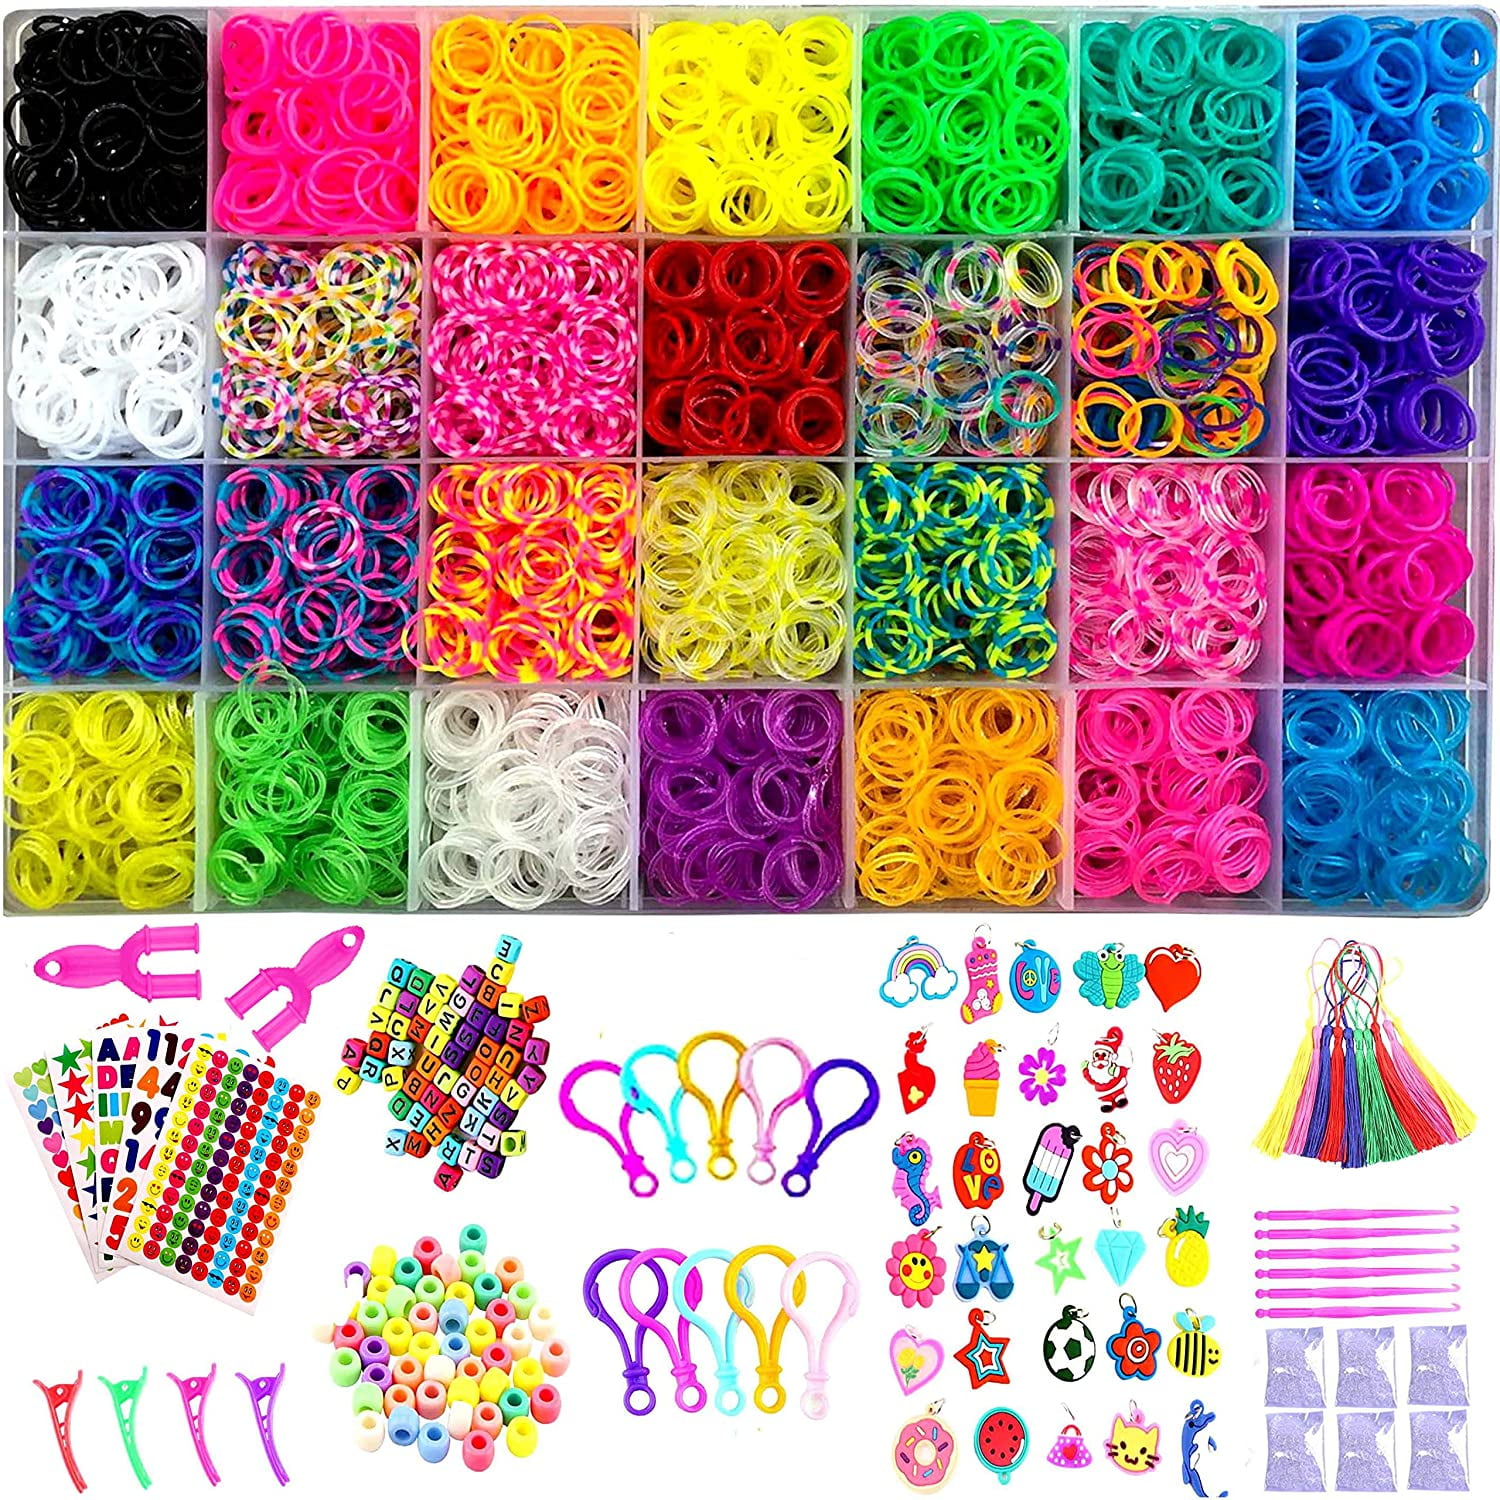 2000 COLOURFUL RAINBOW RUBBER LOOM BANDS BRACELET MAKING KIT SET WITH S-CLIPS 